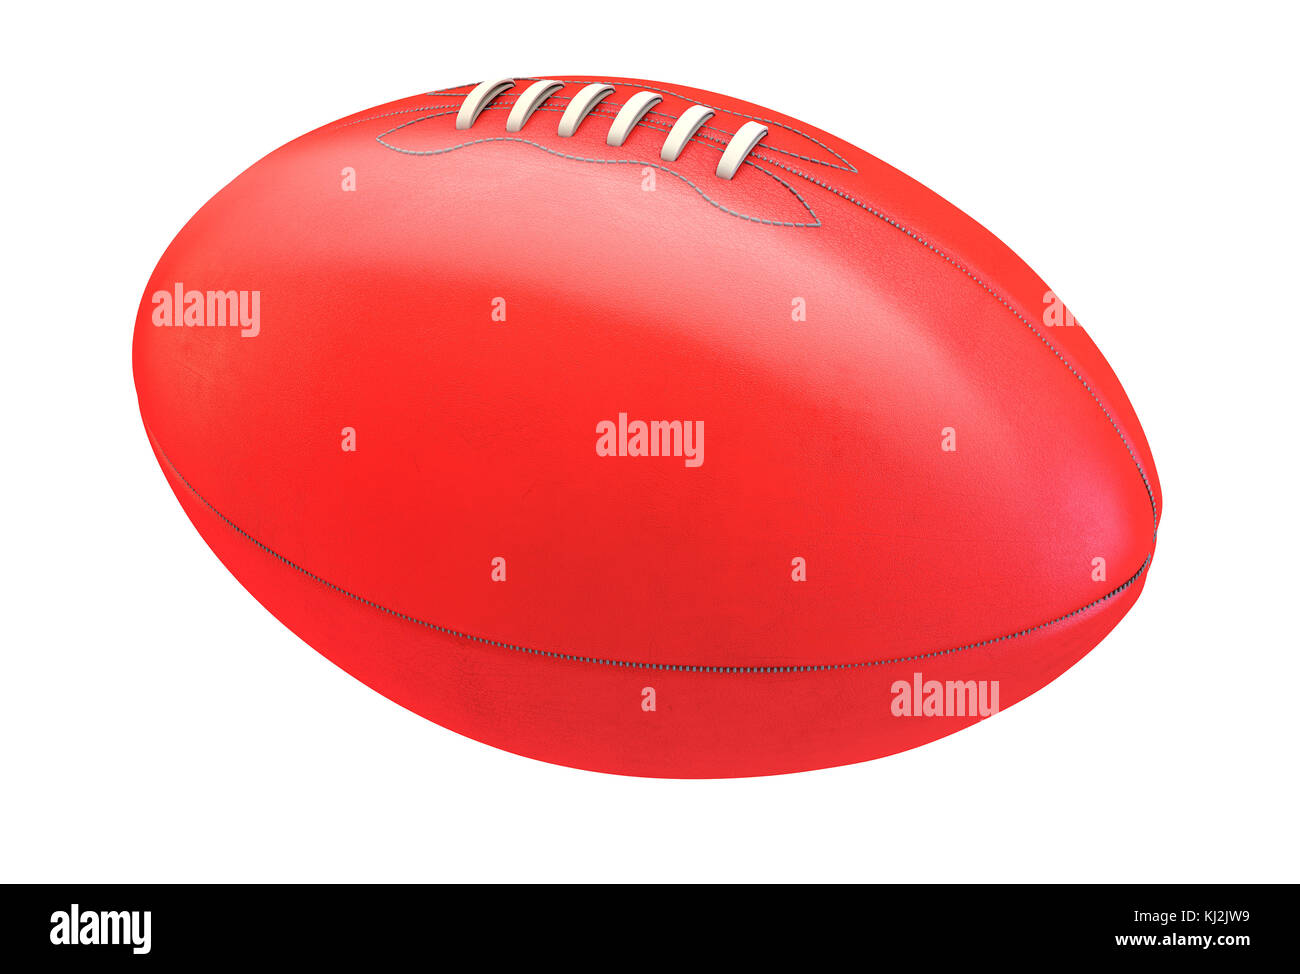 A generic unbranded aussie rules football ball on an isolated whote studio background - 3D render Stock Photo